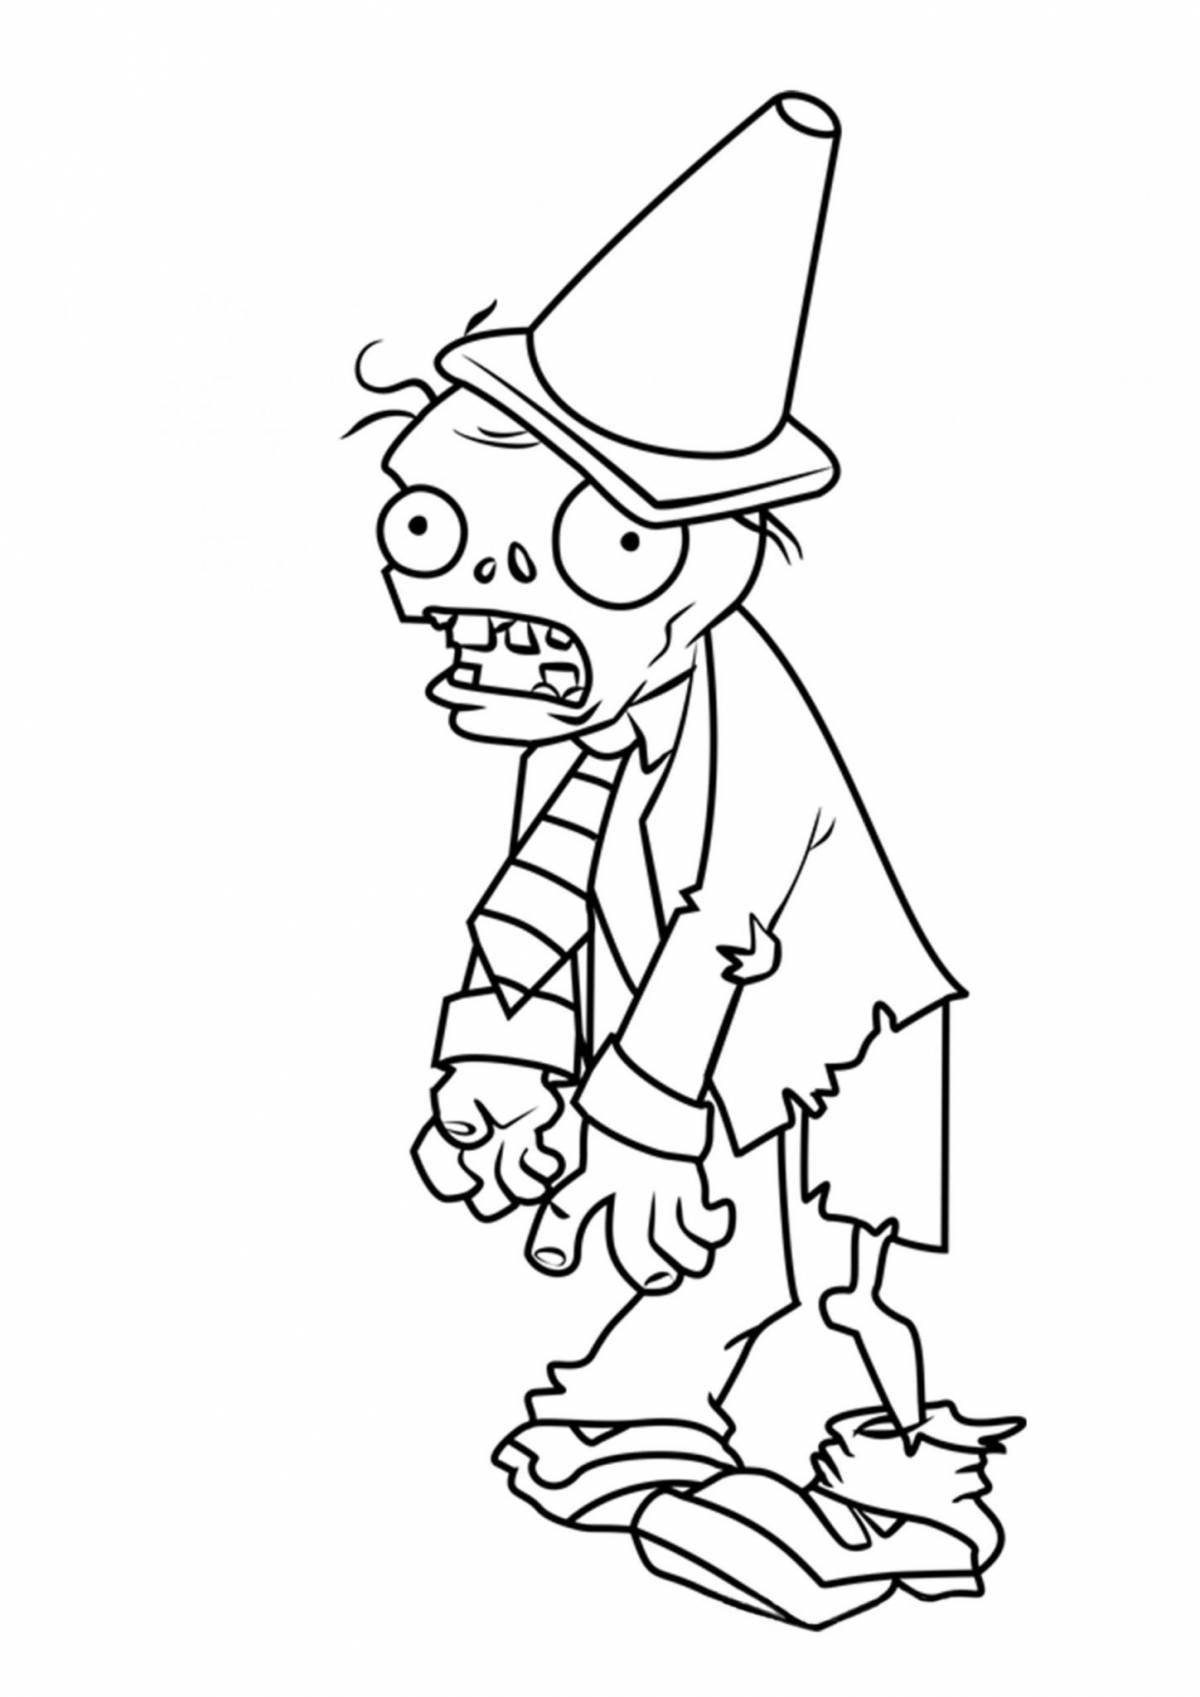 Coloring pages plants vs zombies for kids